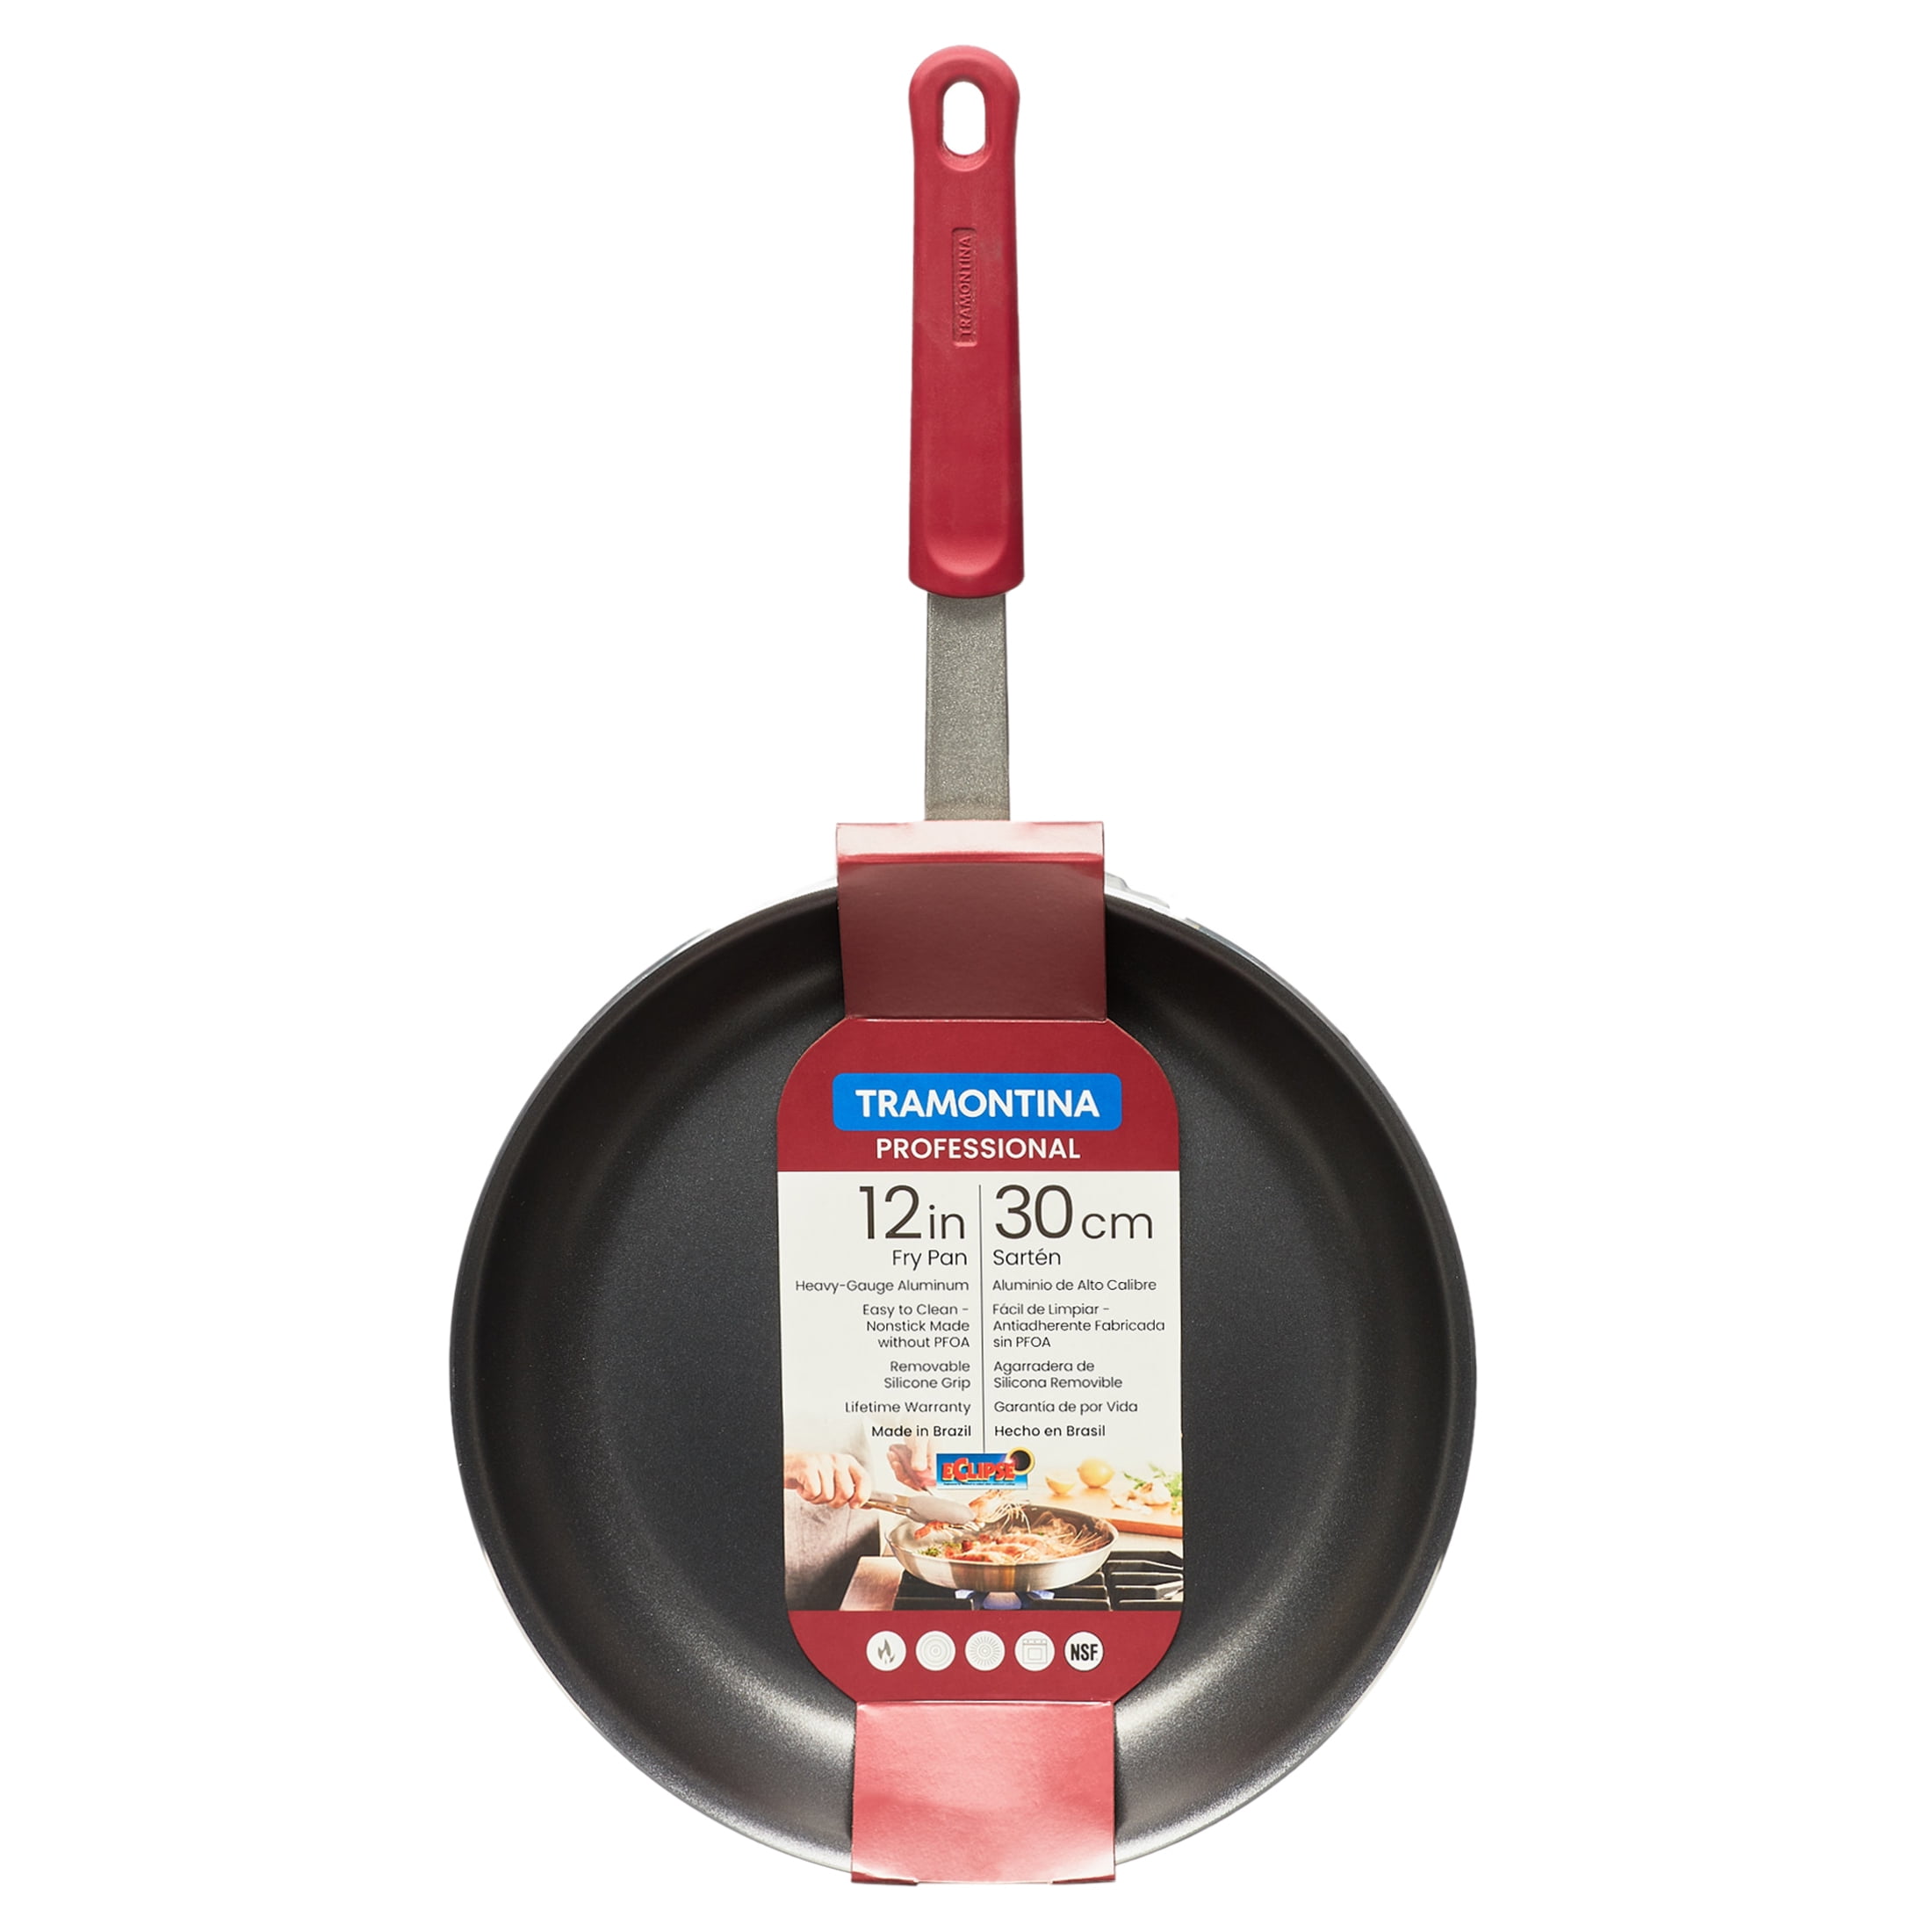 The Tramontina Fry Pans Are Up to 53% Off